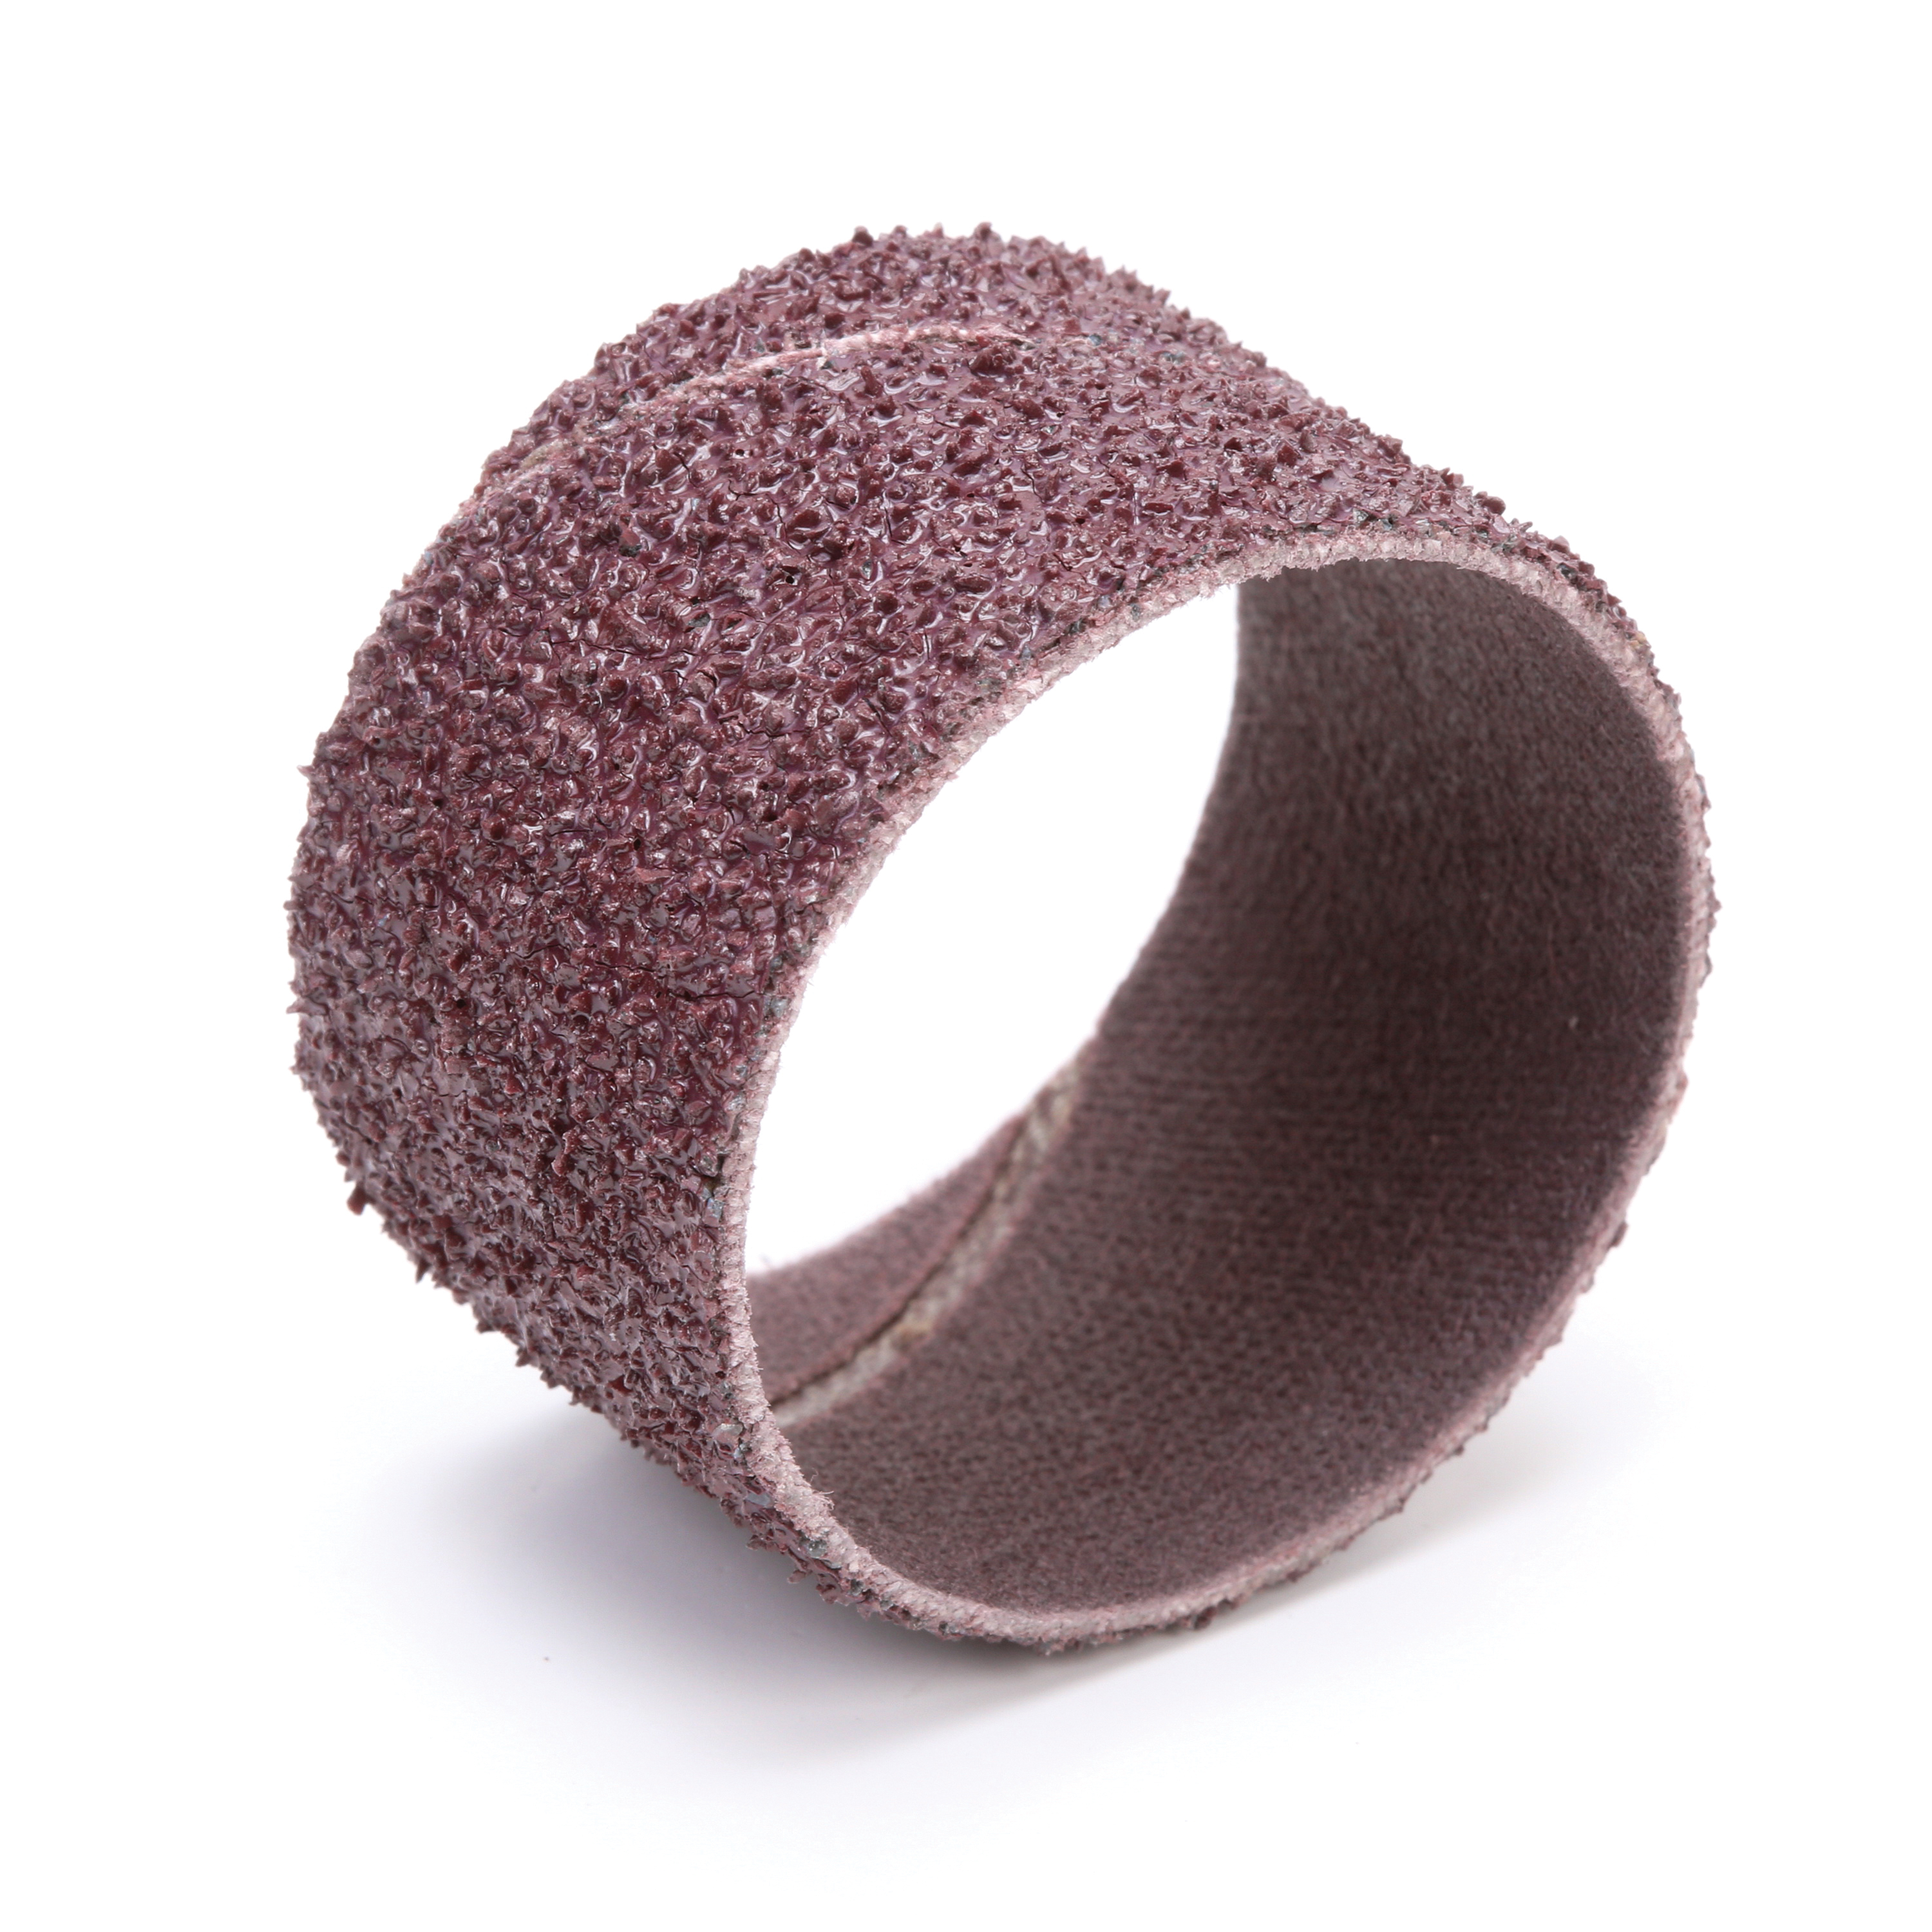 3M™ Evenrun™ 051144-40203 341D Surface Conditioning Coated Abrasive Band, 1-1/2 in Dia x 1 in L Band, 36 Grit, Very Coarse Grade, Aluminum Oxide Abrasive